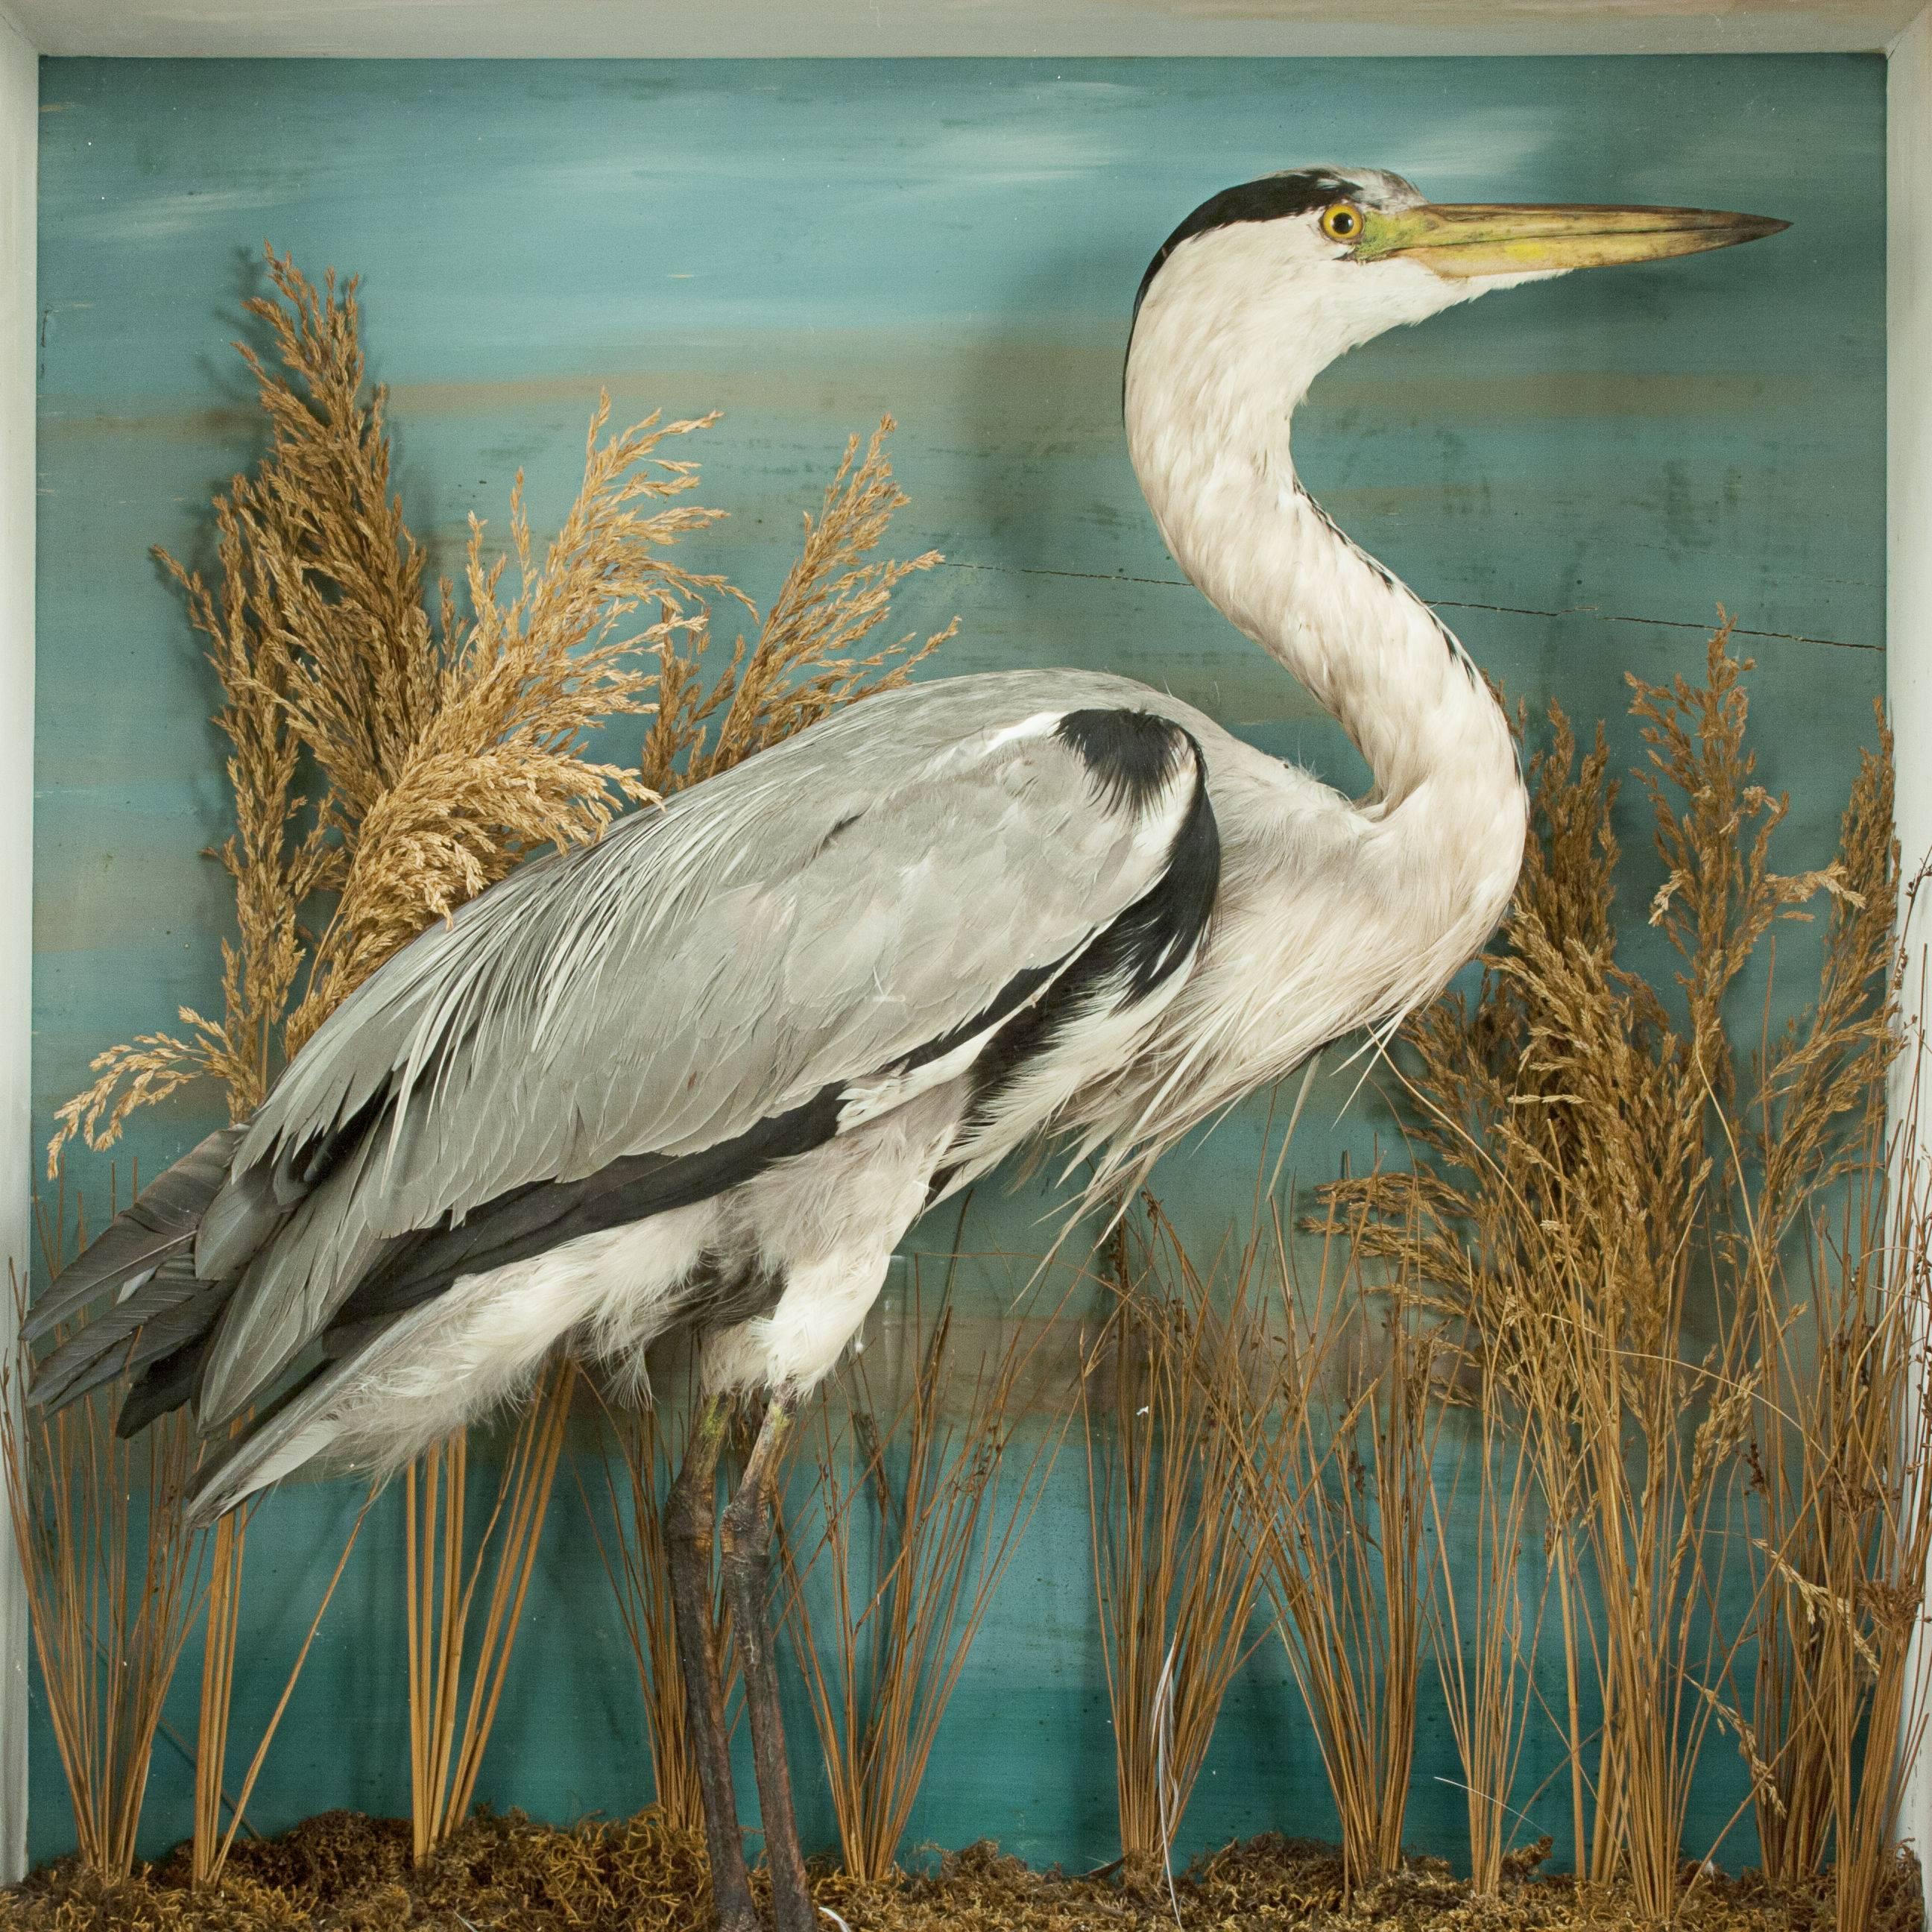 Vintage Taxidermy, Grey Heron by A.C. Foot. 

A well prepared early 20th century cased Heron. The Heron mounted in a naturalistic setting, modelled amongst fine groundwork all against a painted backdrop. The bird is displayed in original black